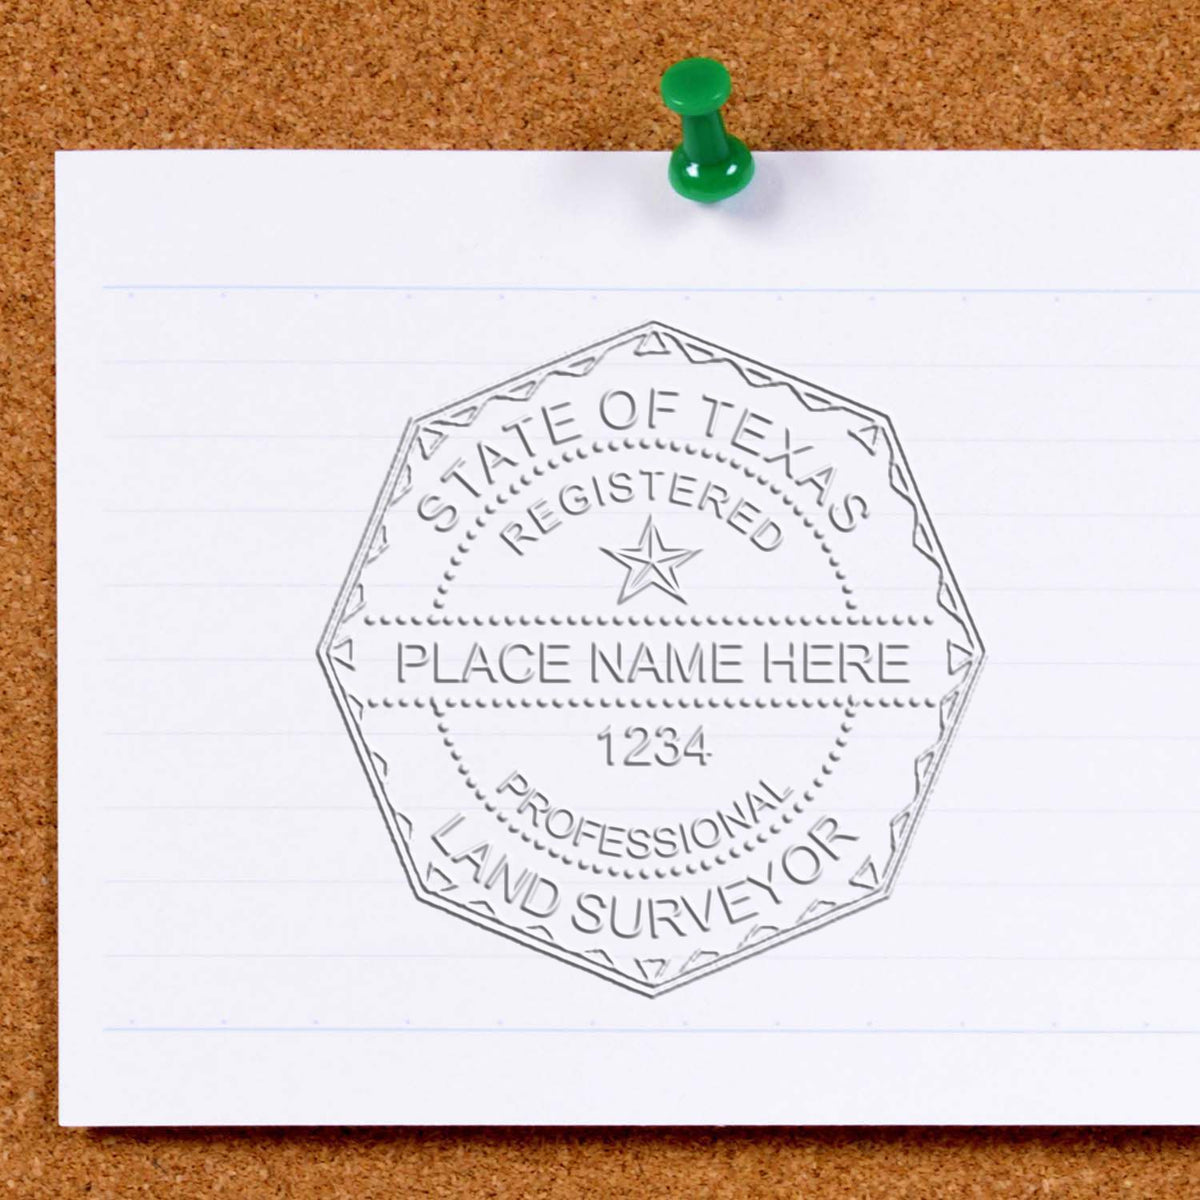 Another Example of a stamped impression of the State of Texas Soft Land Surveyor Embossing Seal on a piece of office paper.